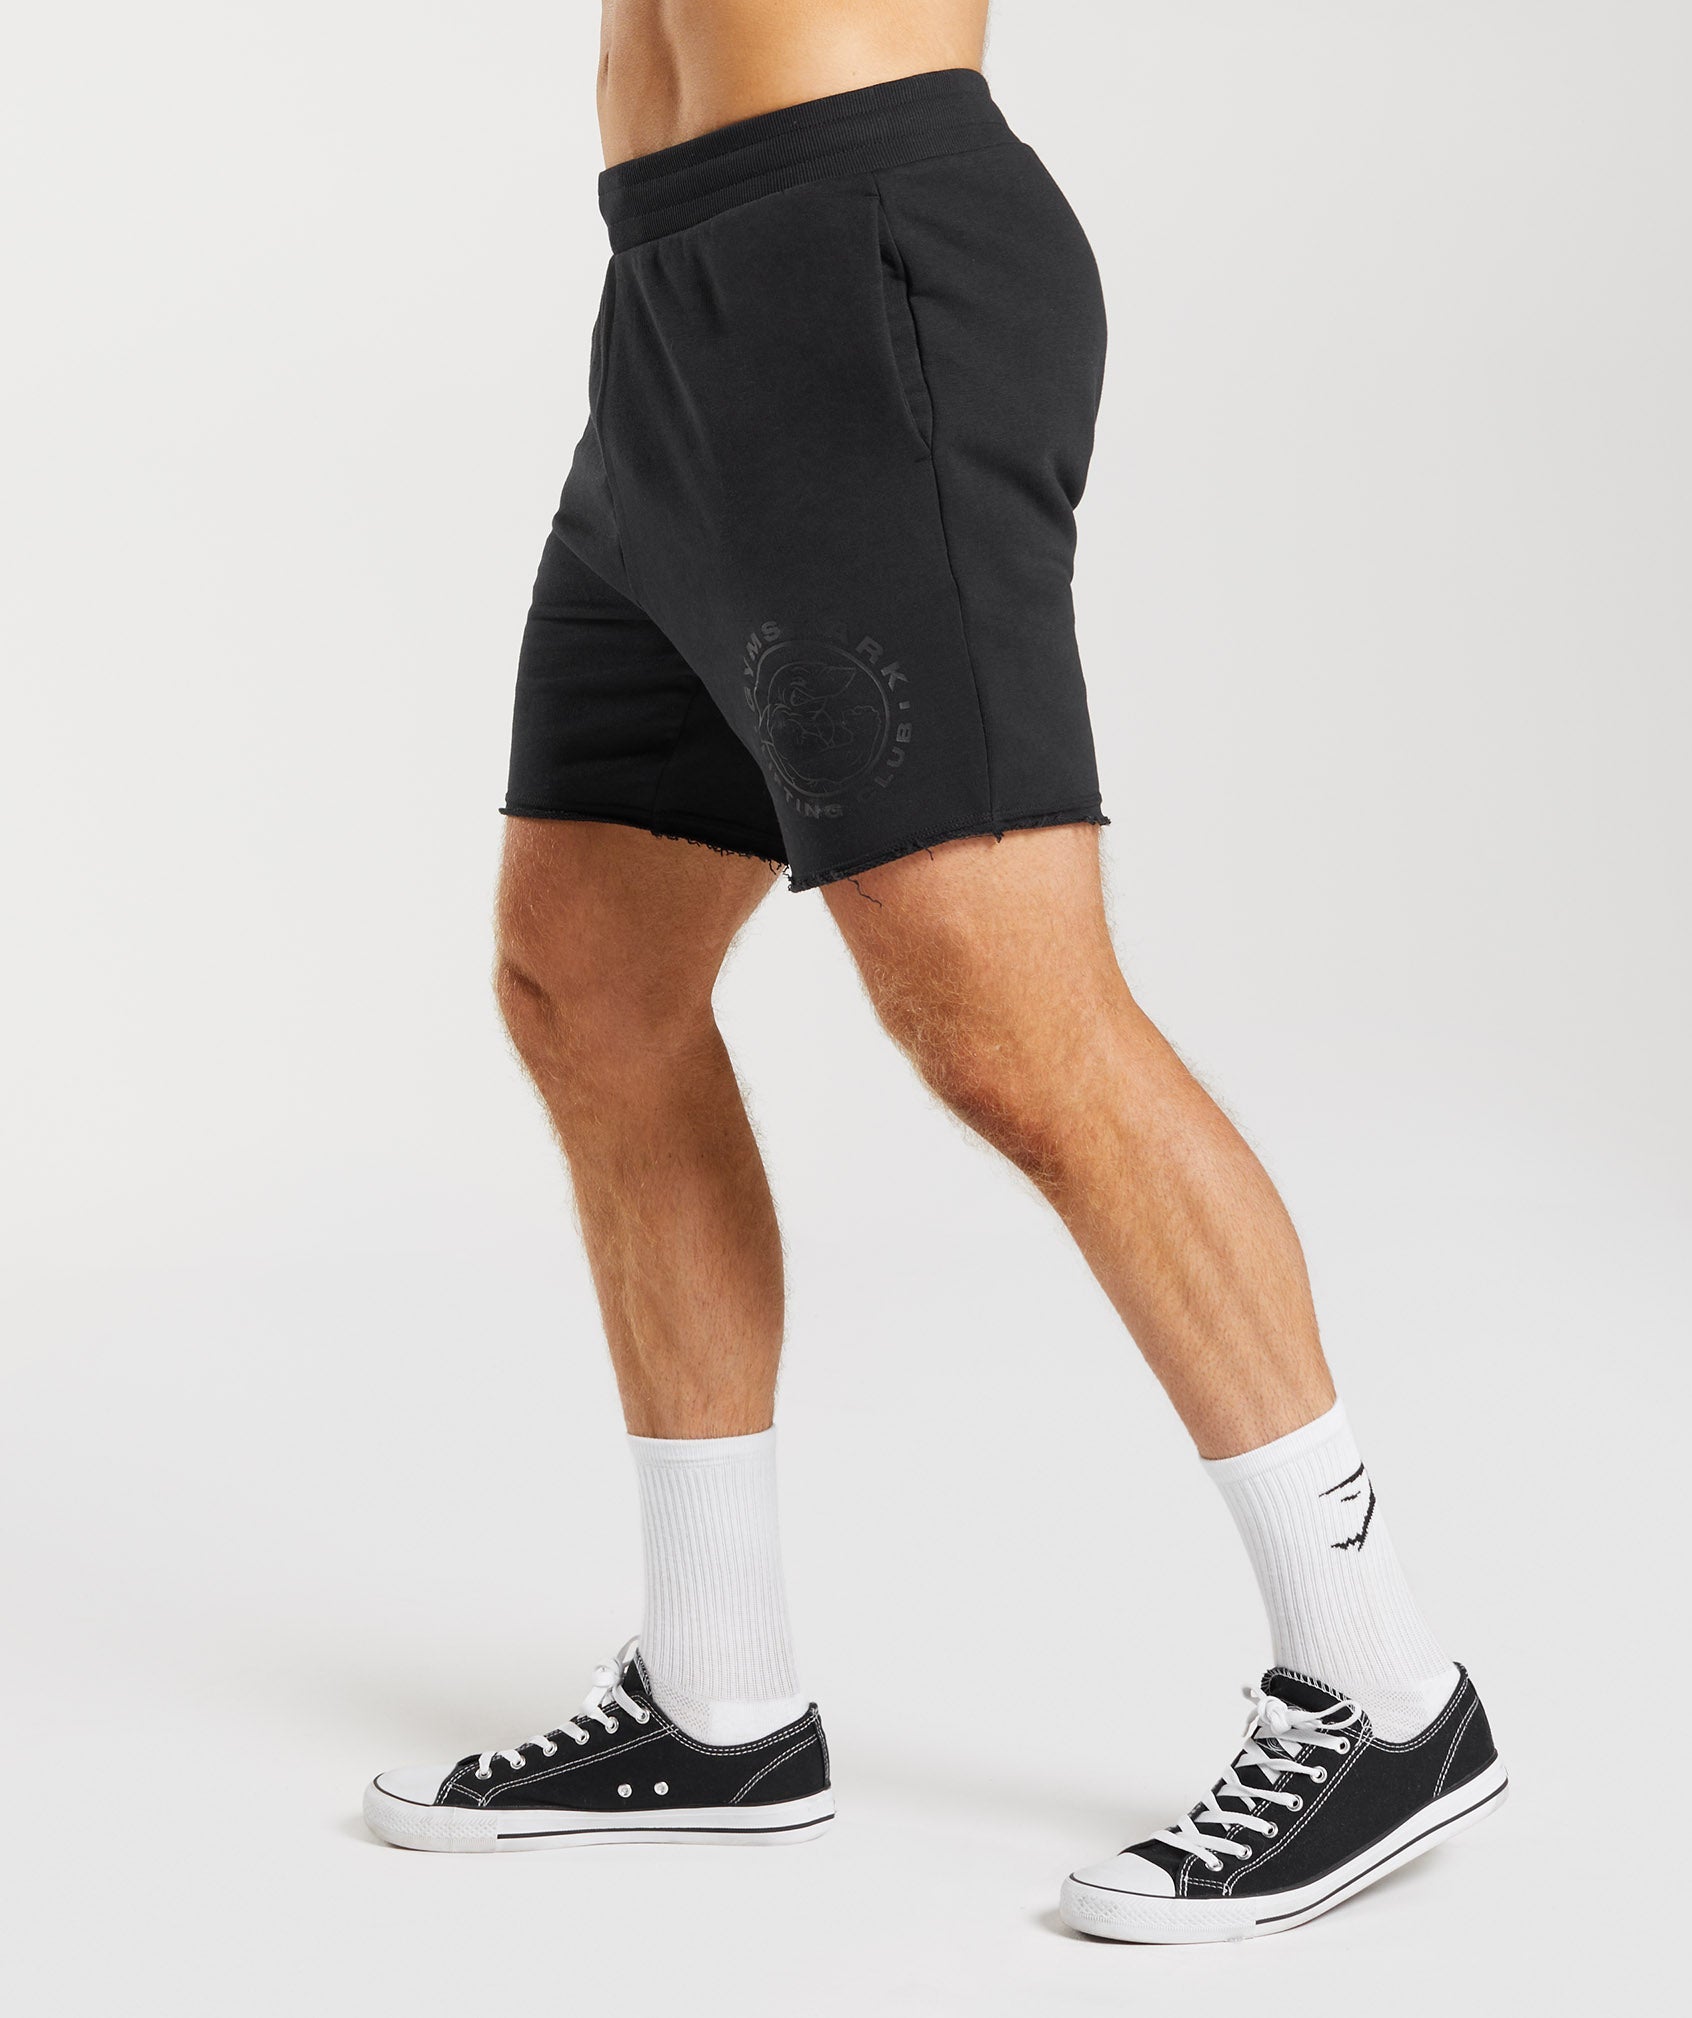 Legacy Shorts in Black - view 3